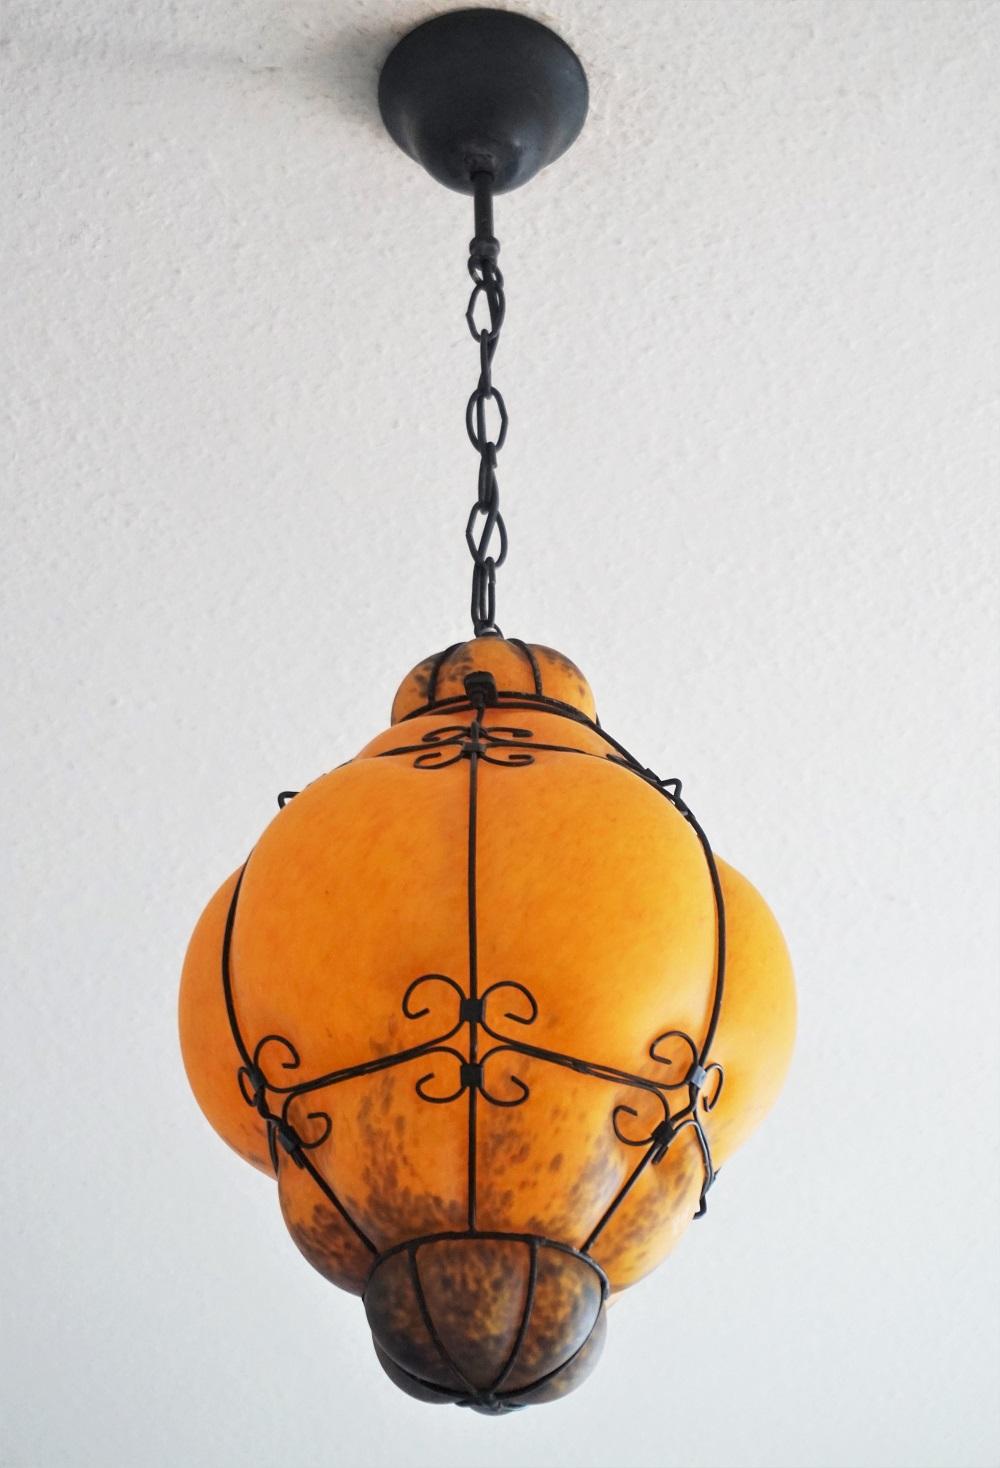 Art Deco Murano Handcrafted Colored Glass Wrought Iron Pendant or Lantern, Venice, Italy For Sale